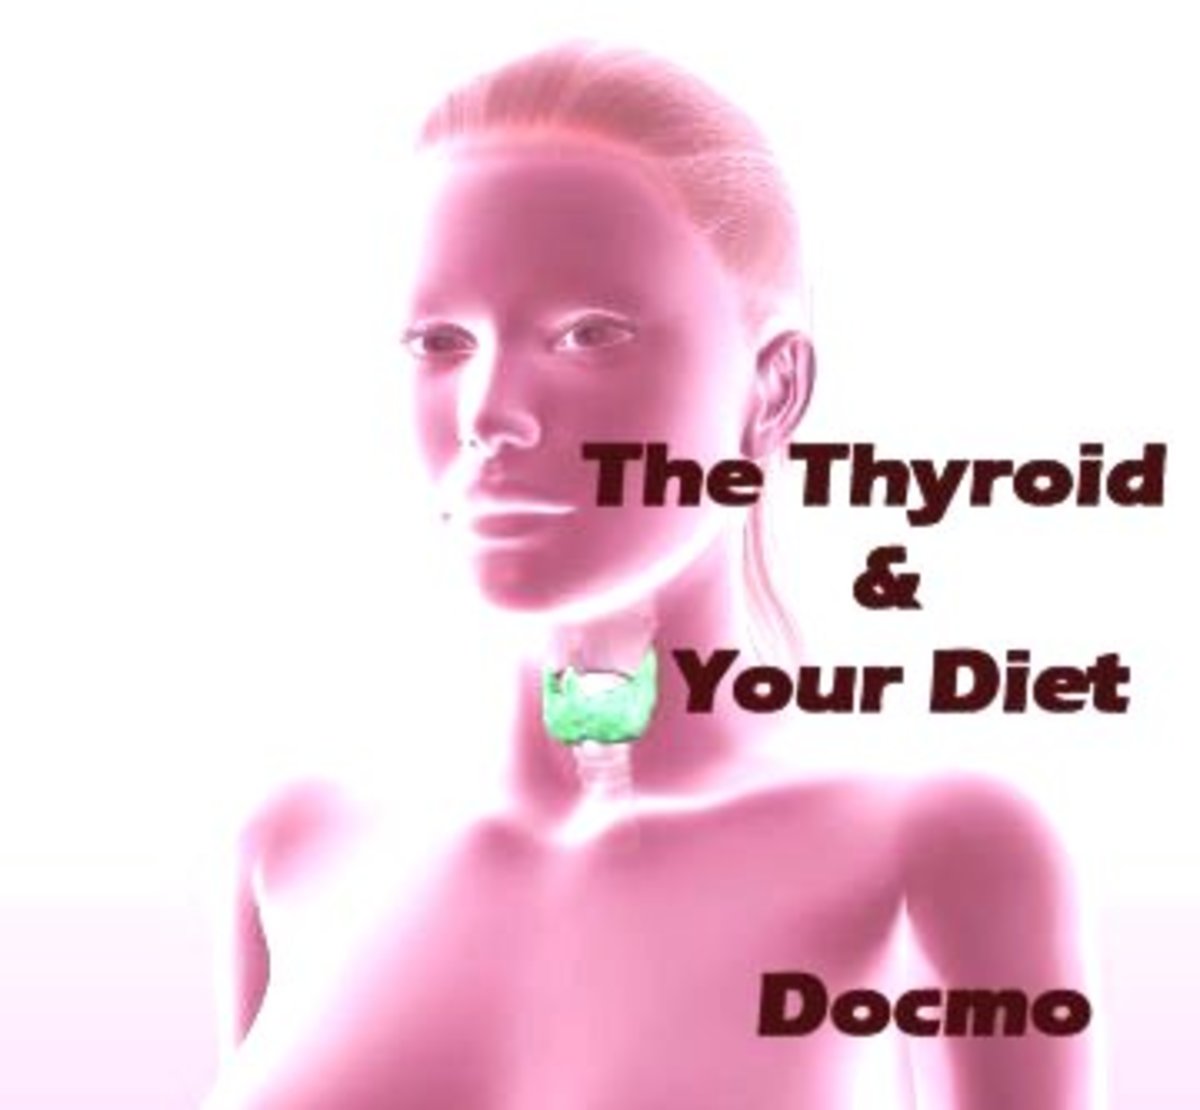 The Thyroid Gland and Your Diet